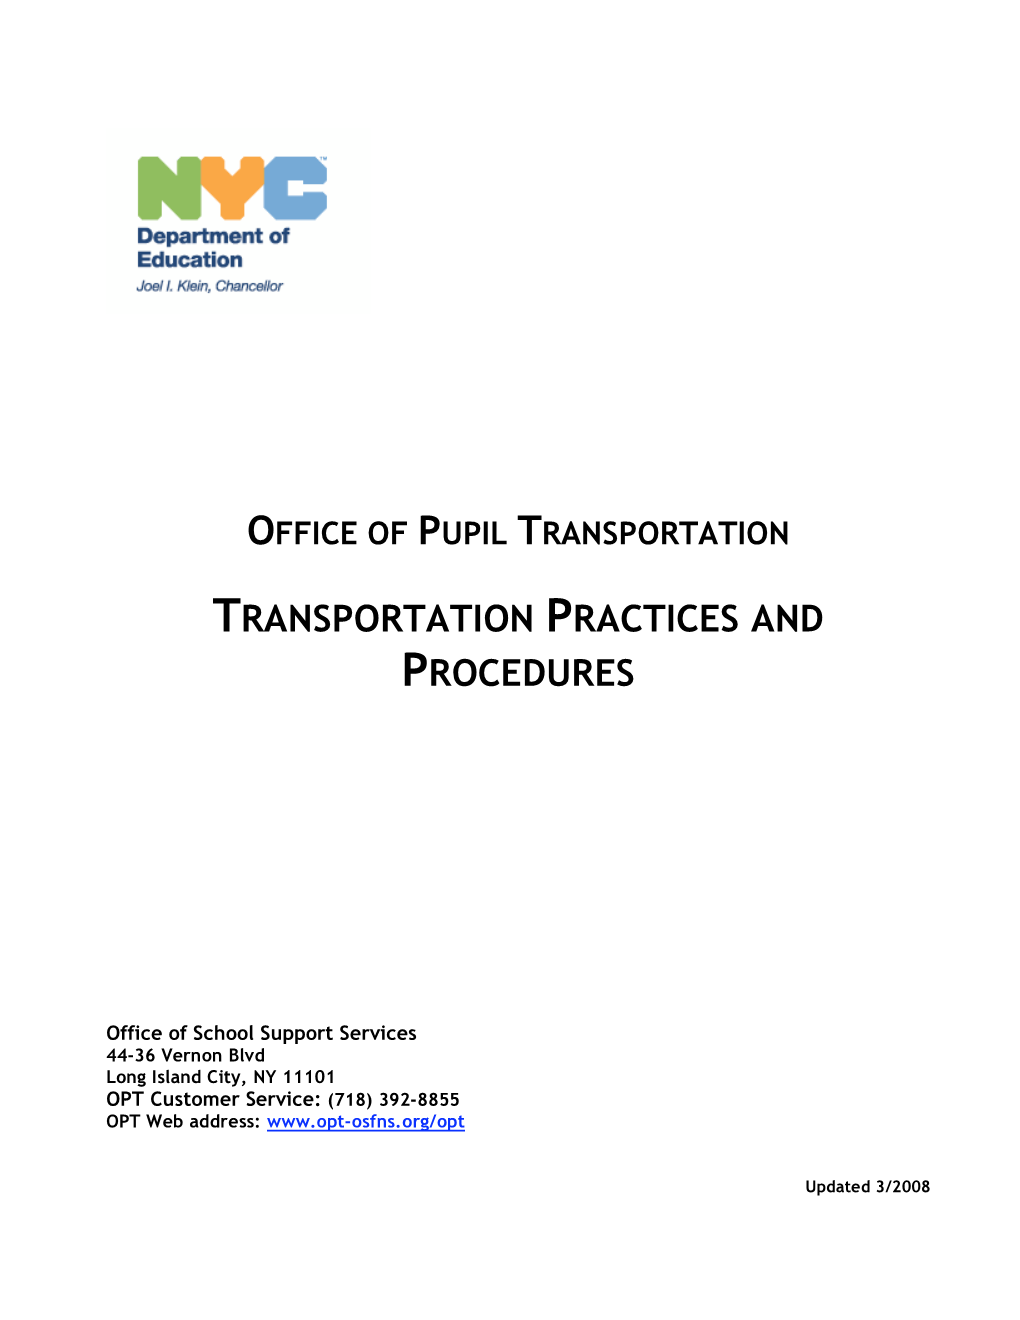 Transportation Practices and Procedures